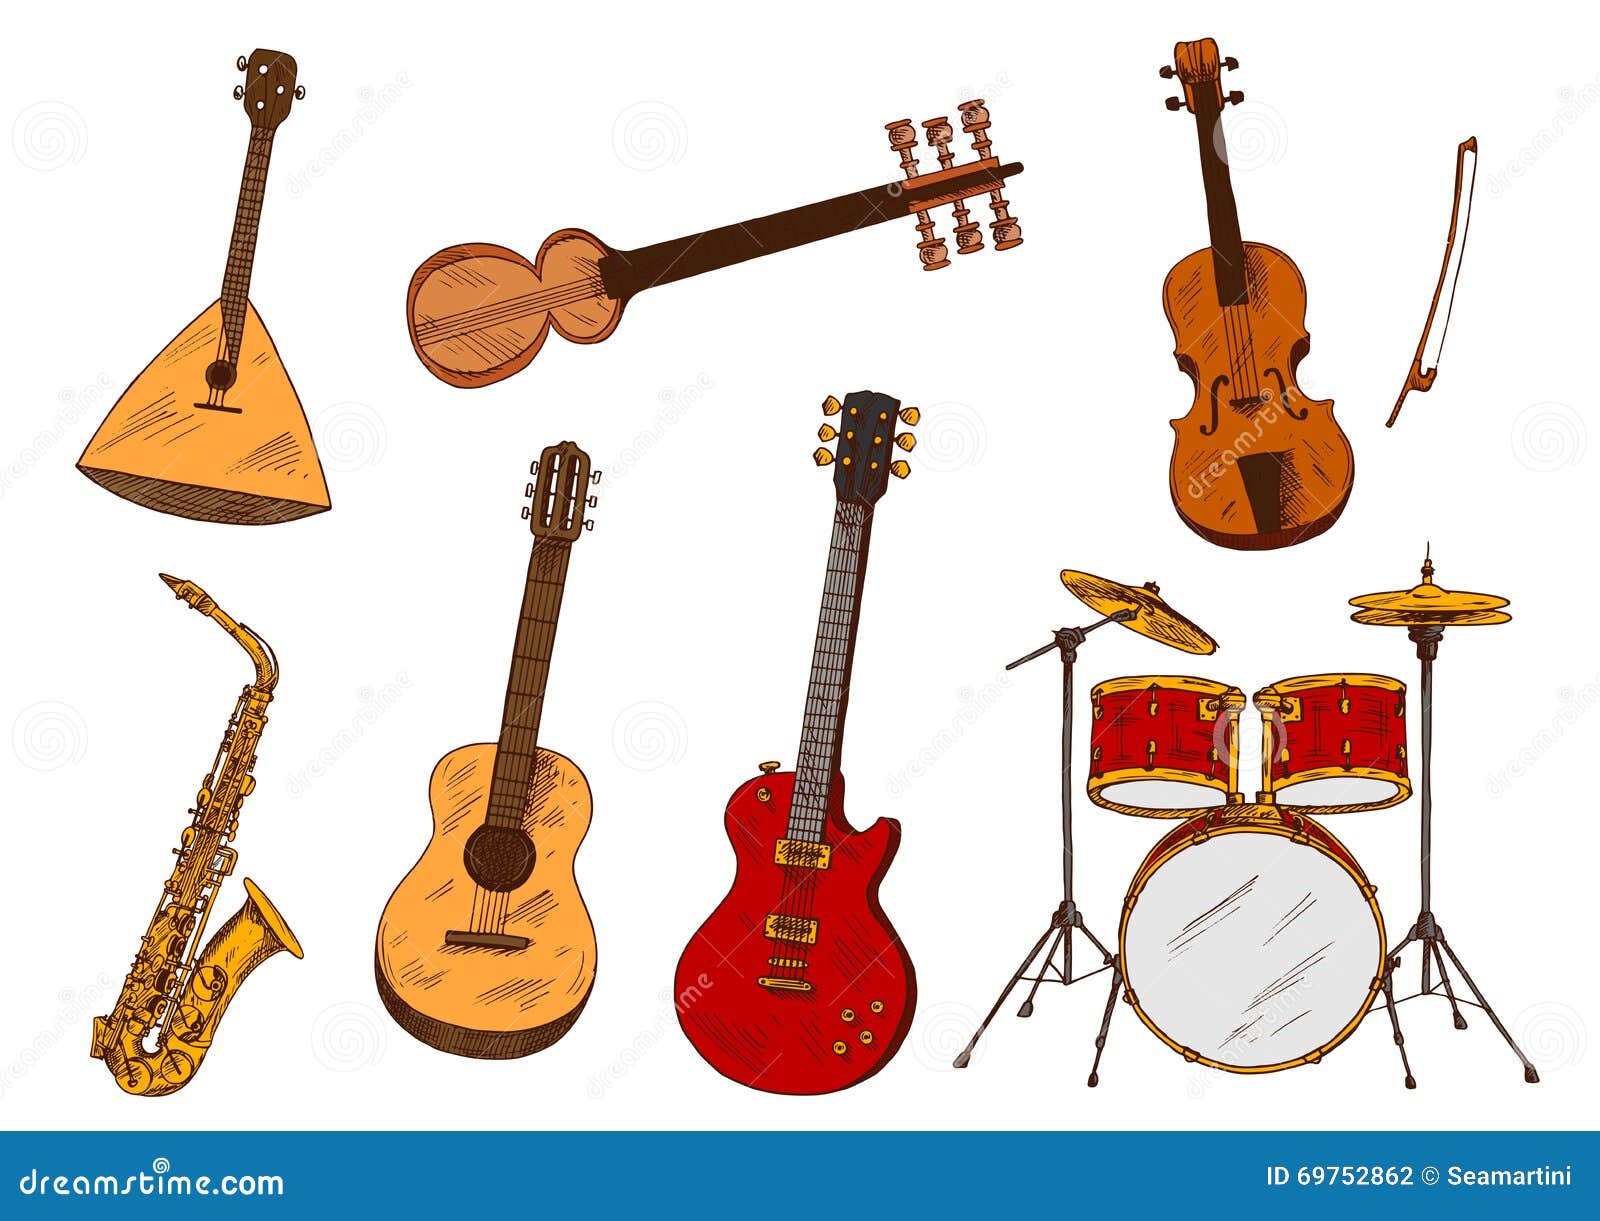 Classic and ethnic musical instruments sketches with drum set and saxophone, electric and acoustic guitars, violin, indian sarod and balalaika. Music, art festival poster or concert themes